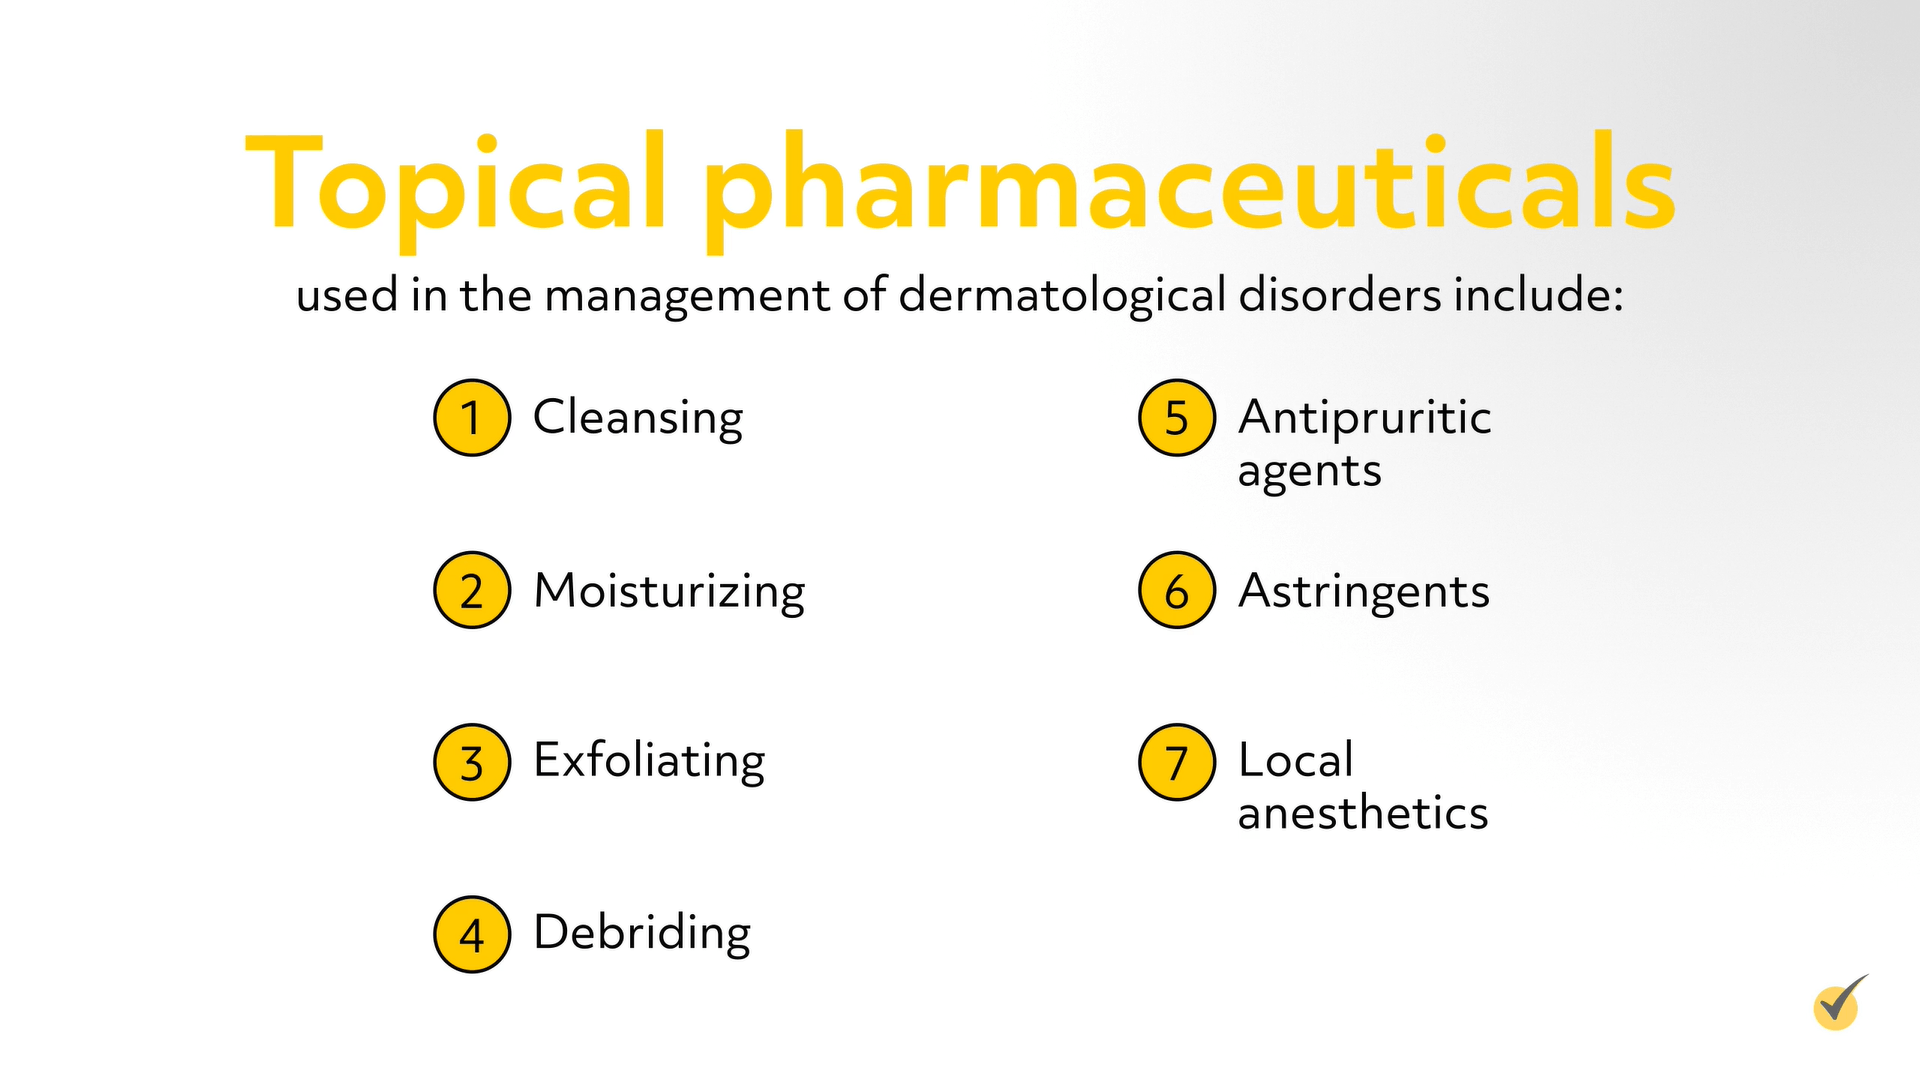 topical pharmaceuticals